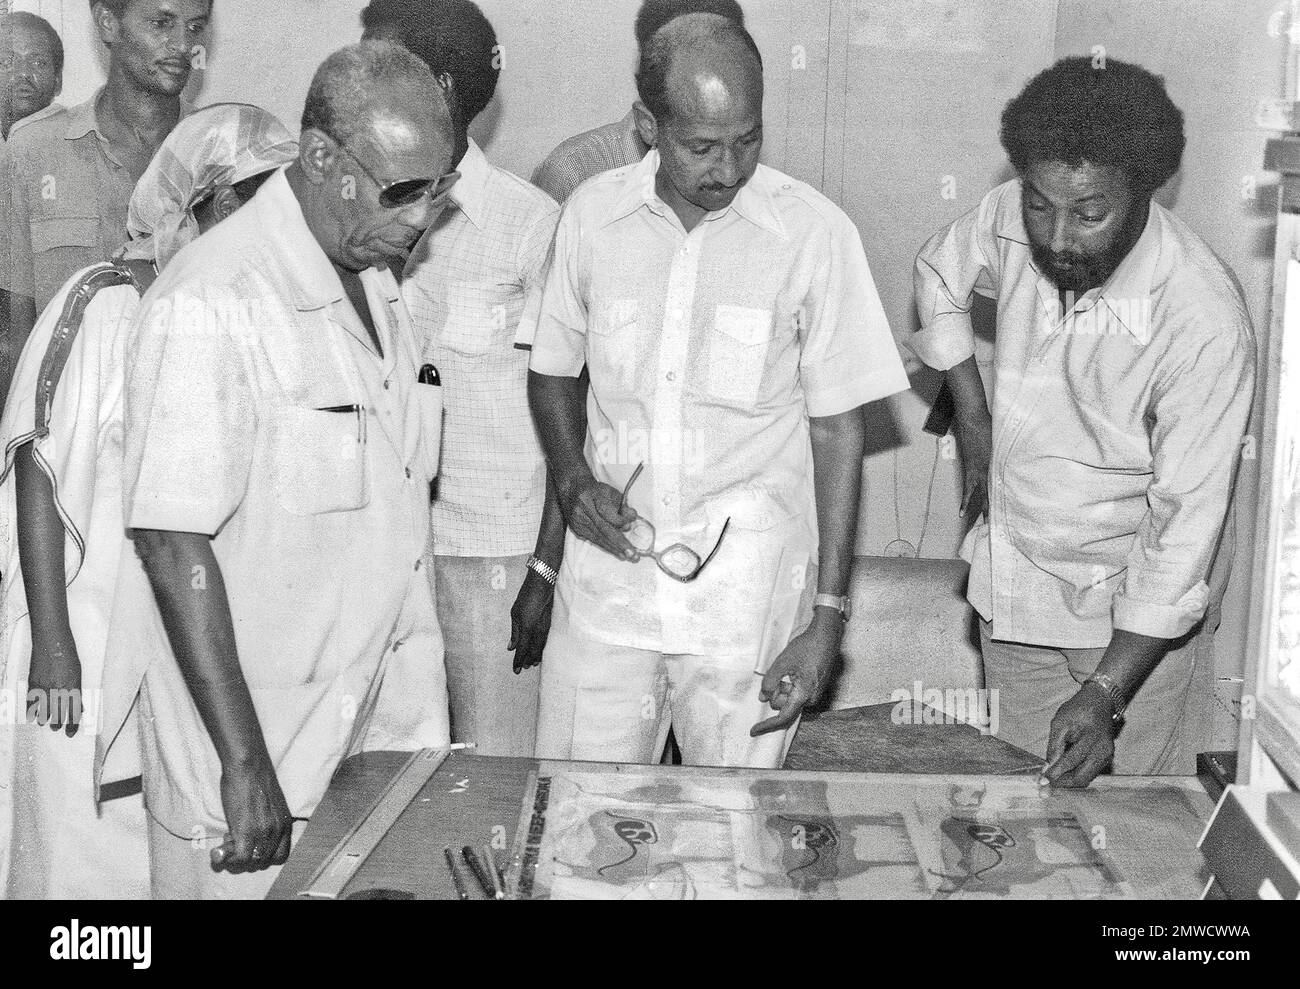 Somali President Siad Barre in front of design of the first colour poster in the country, 1984, historical photo, Mogadishu, Somalia Stock Photo